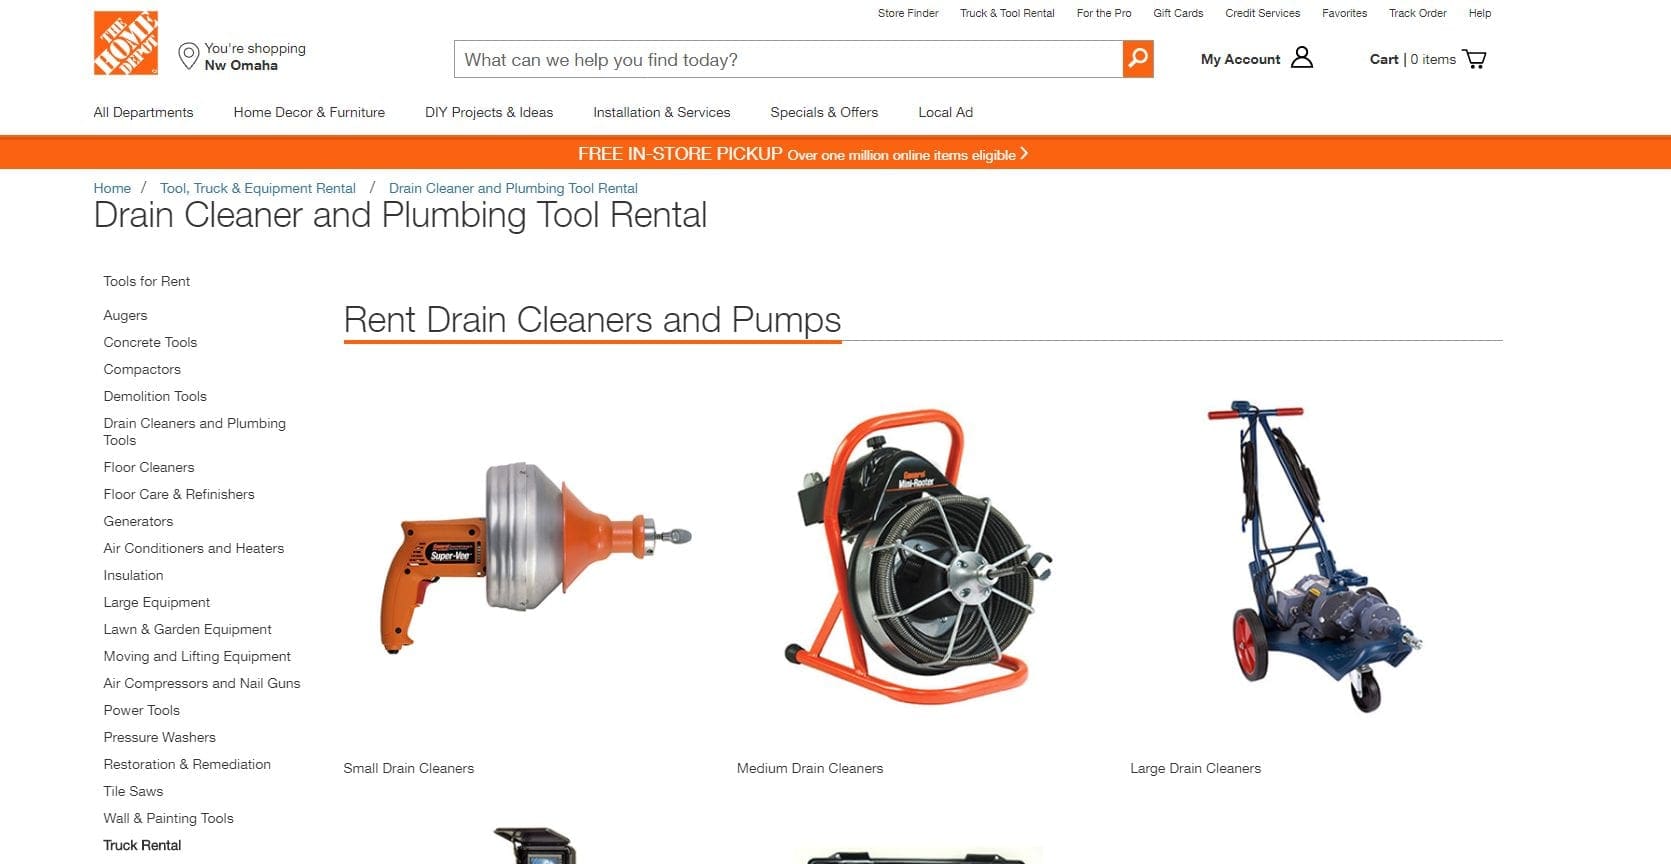 Screenshot of the home depot tool rental center including augers, drain cleaners, and other power tools